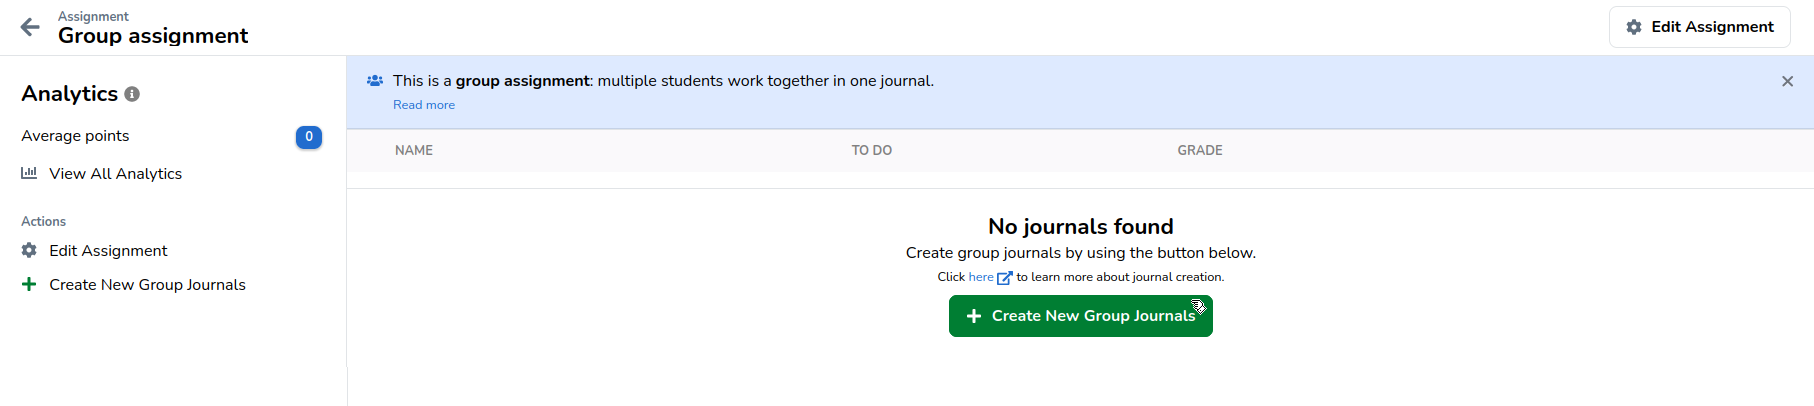 Group assignment create new journals button highlighted